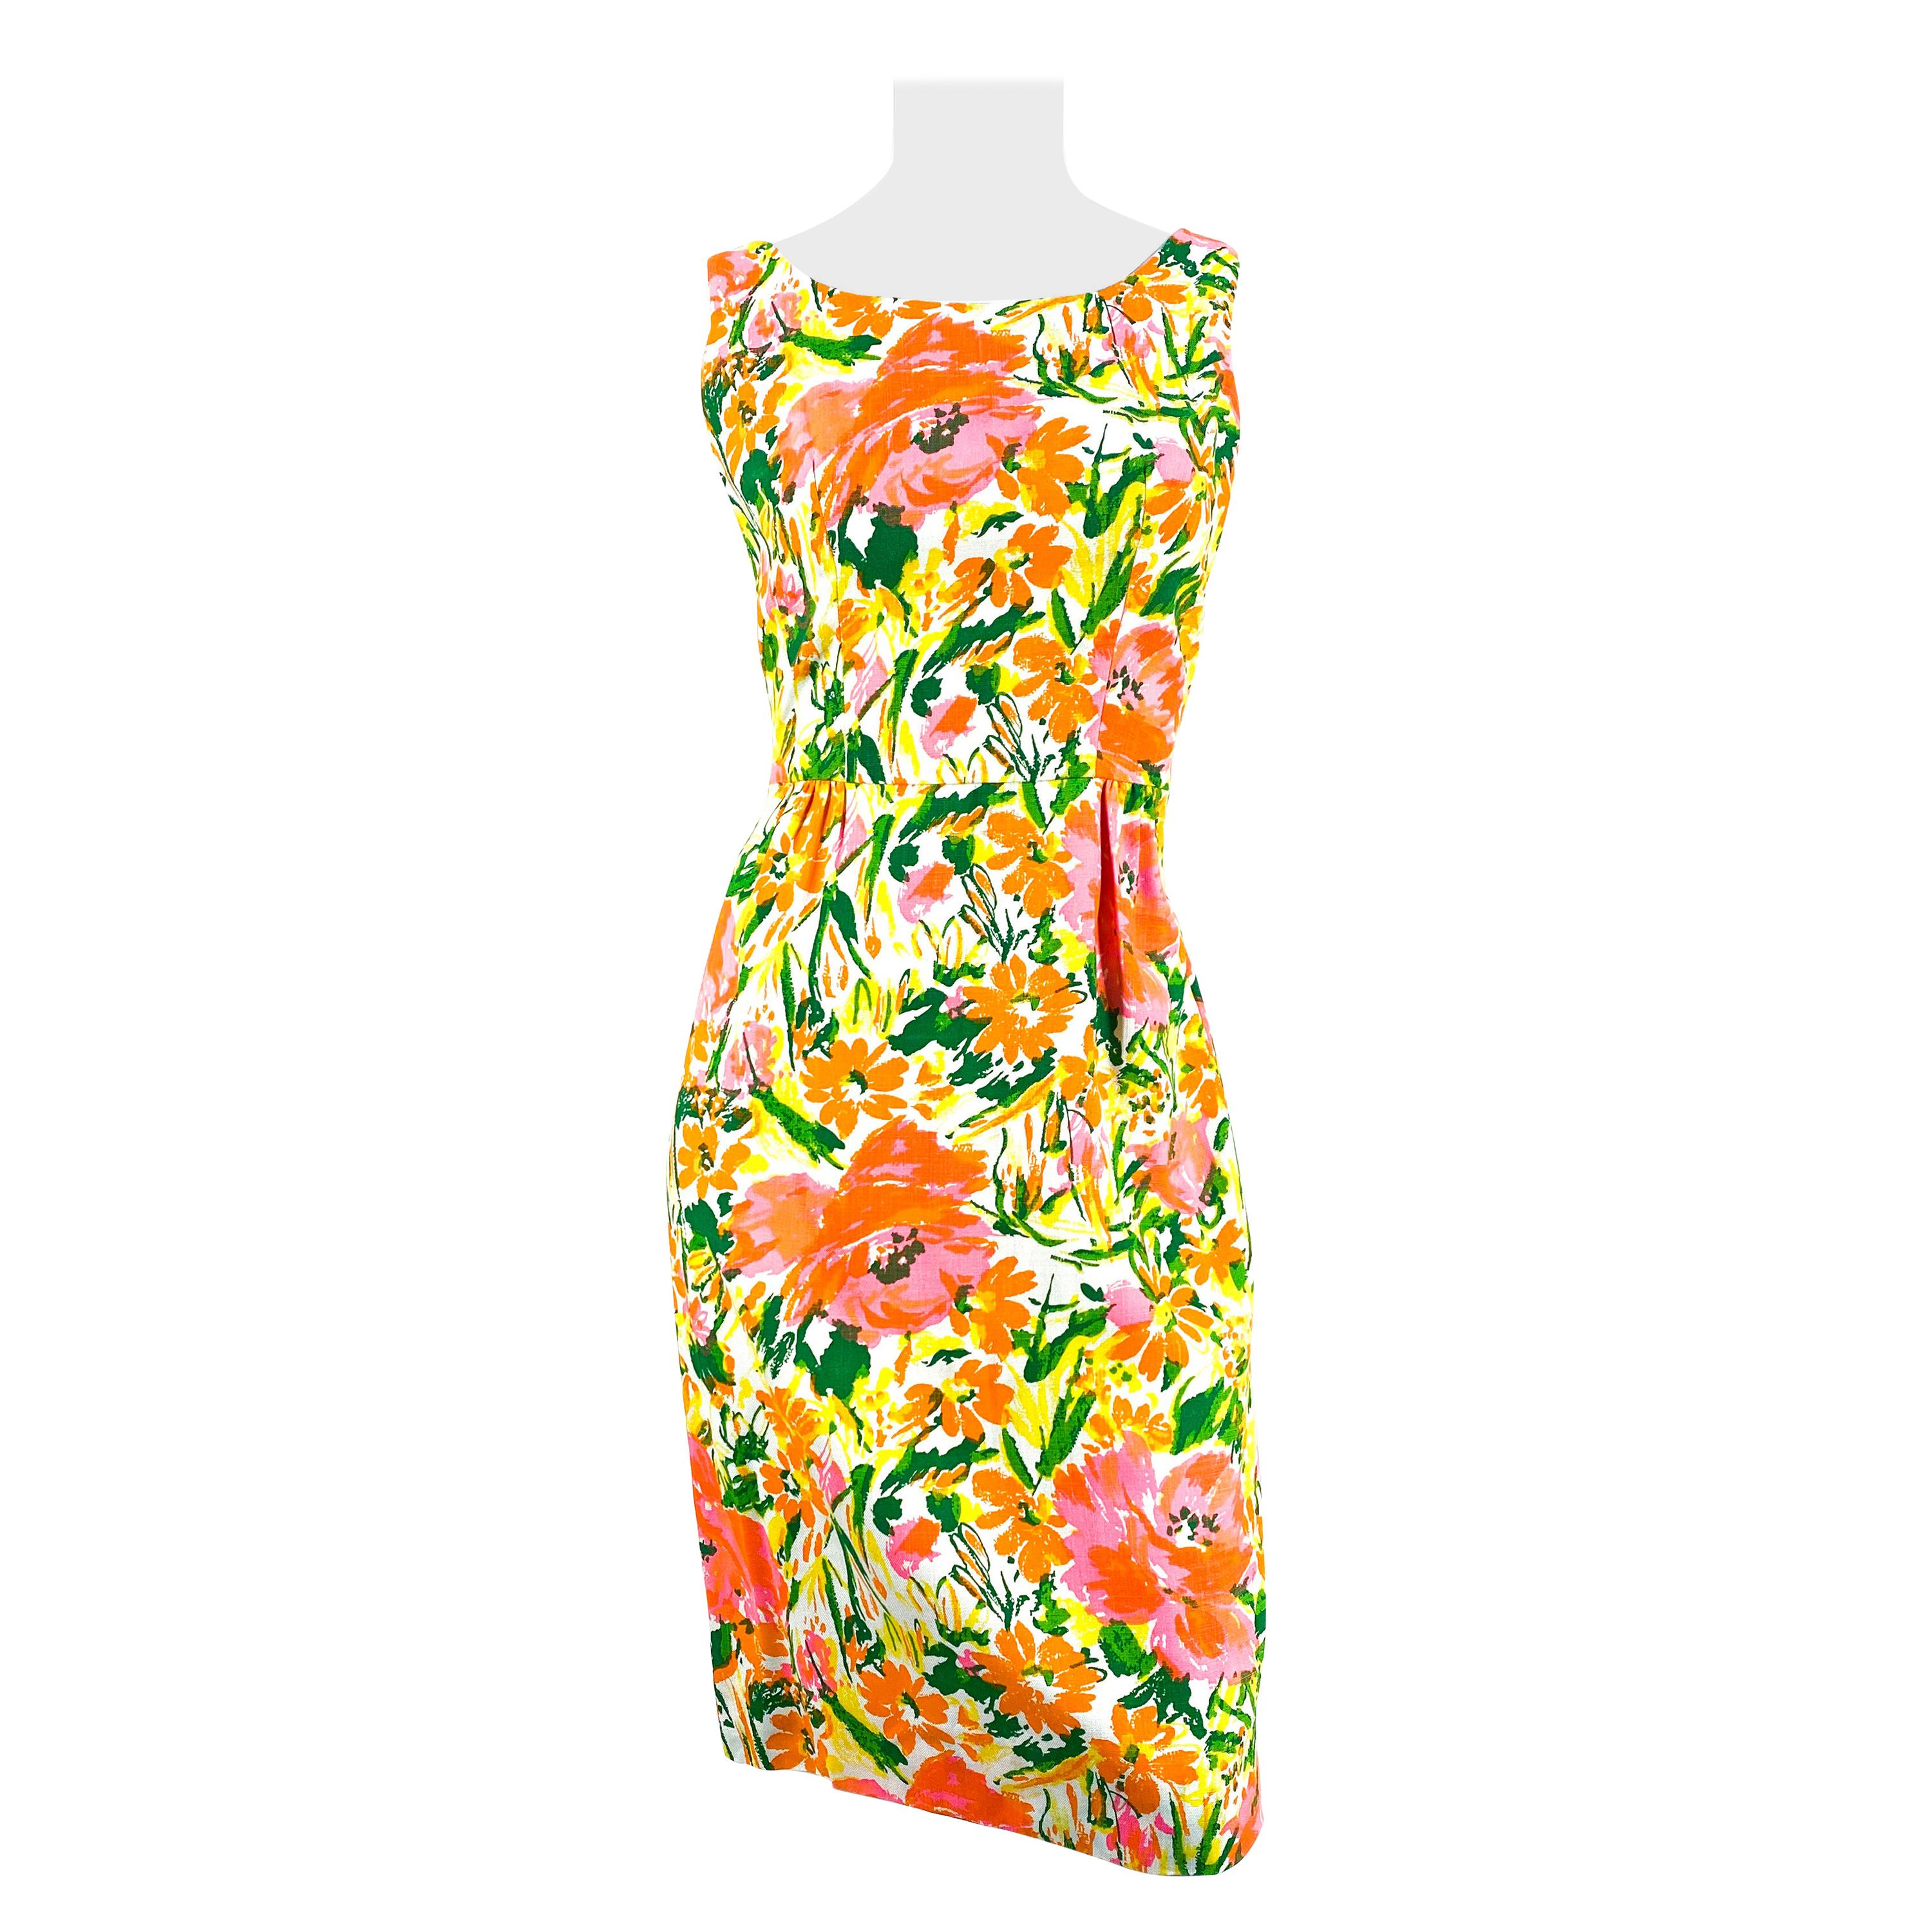 1960s Neon Floral Printed Cotton Day Dress